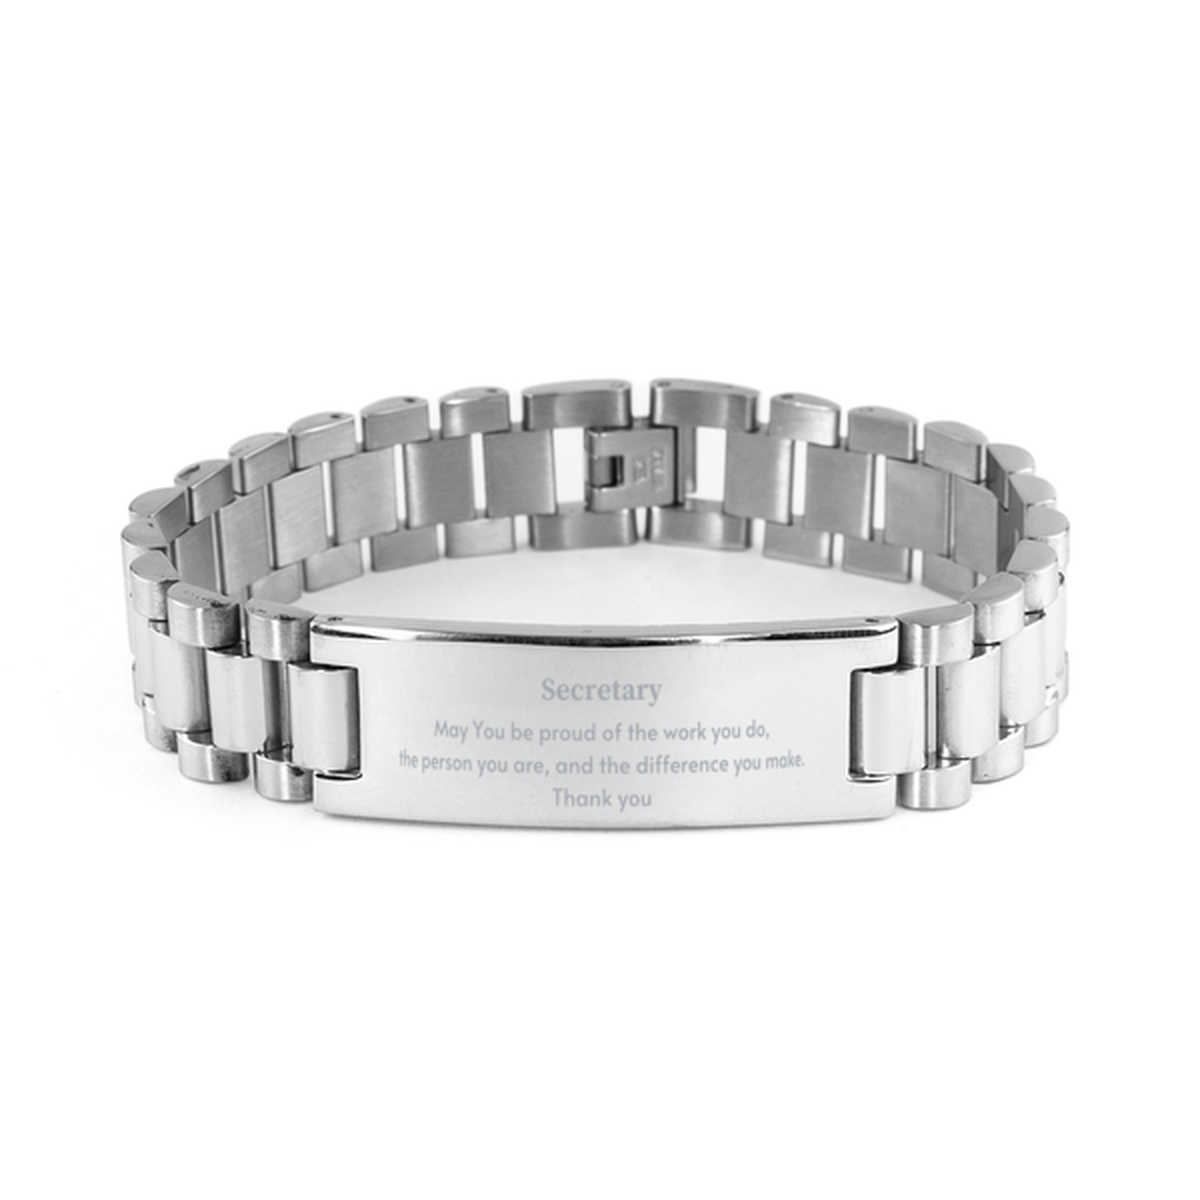 Heartwarming Ladder Stainless Steel Bracelet Retirement Coworkers Gifts for Secretary, Secretary May You be proud of the work you do, the person you are Gifts for Boss Men Women Friends